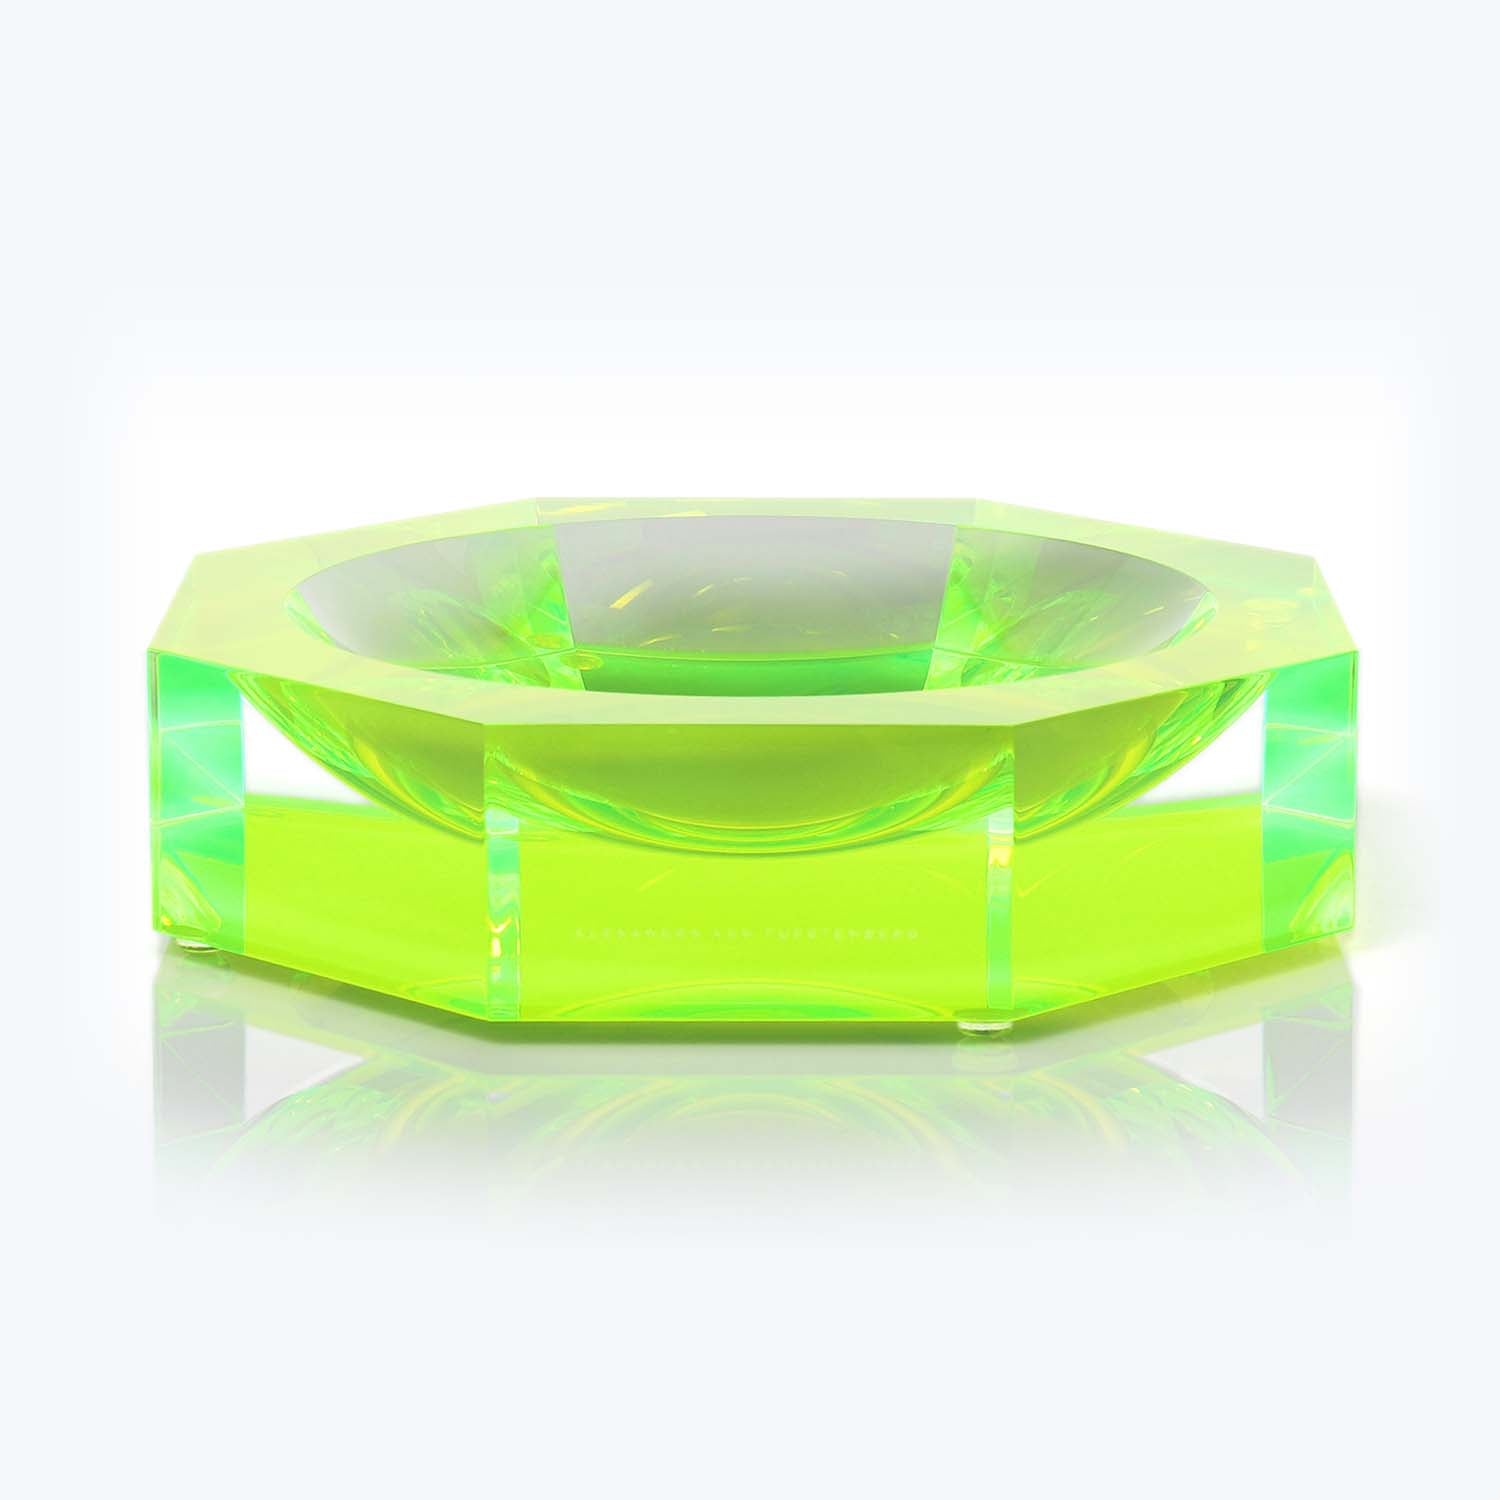 Vibrant green, geometric object with captivating light patterns, possibly glass.